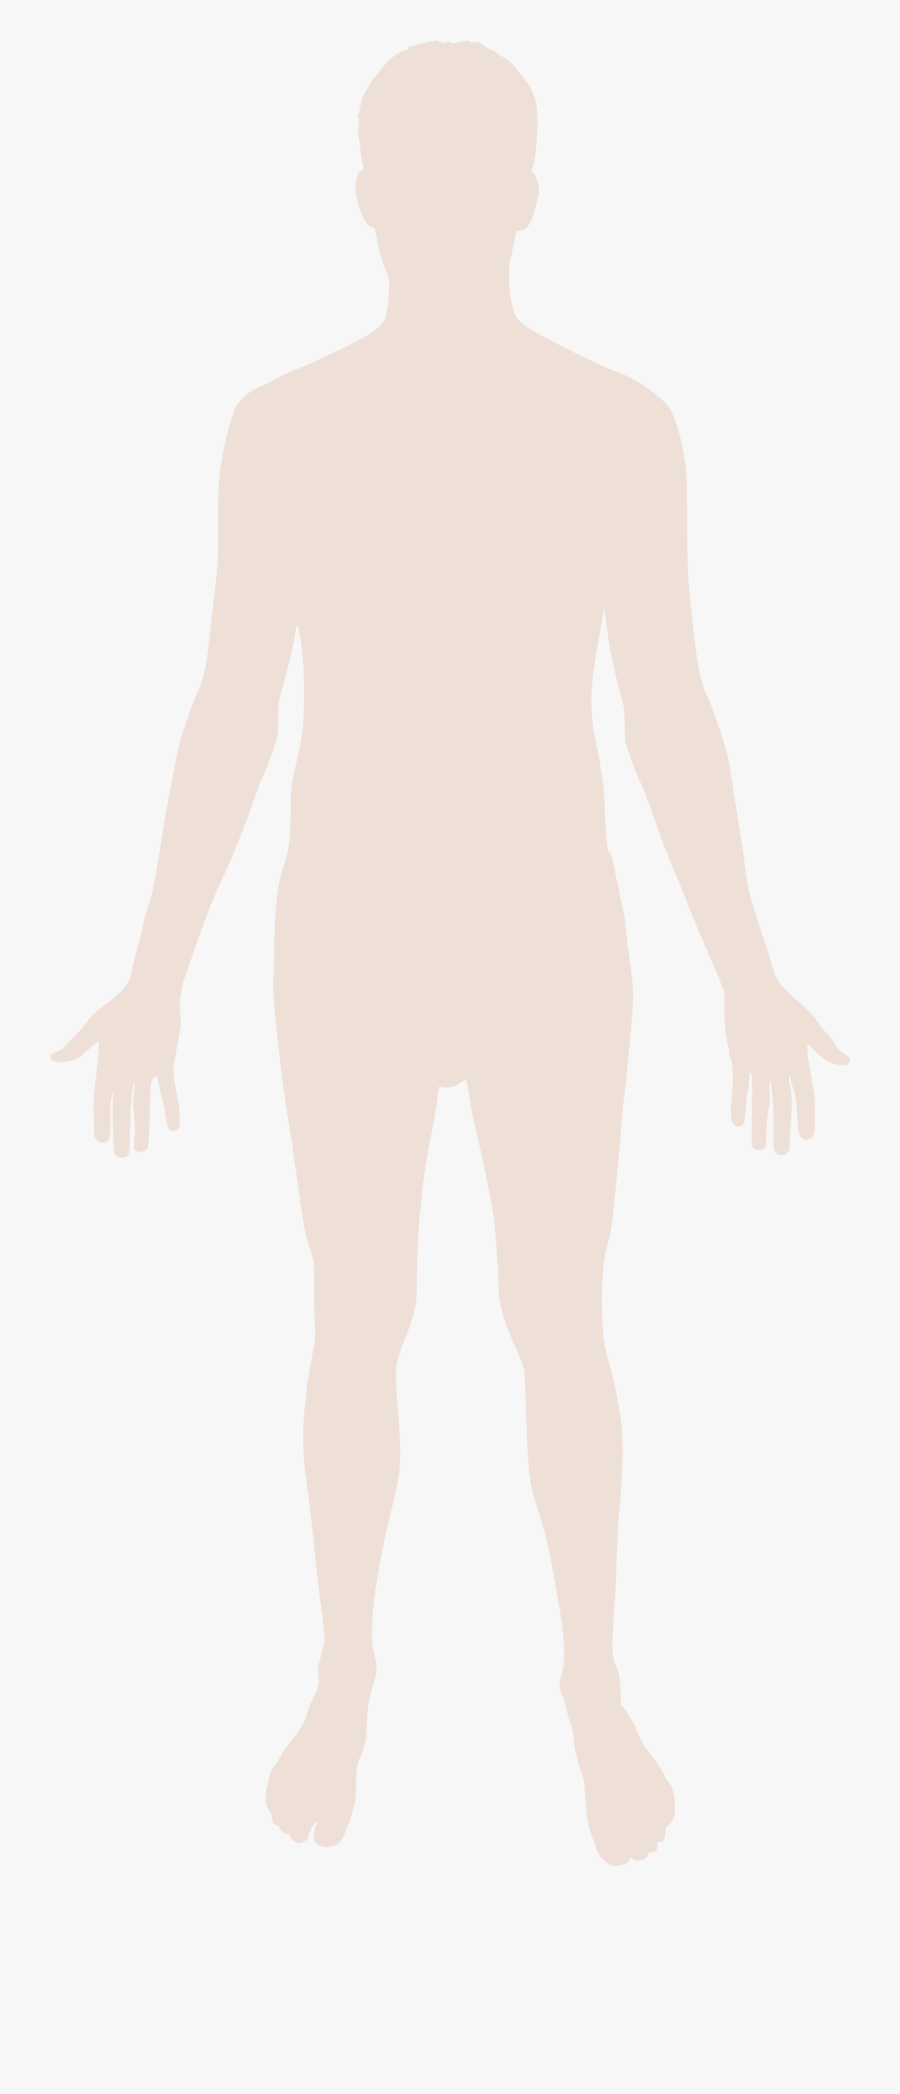 Human Body Silhouette - Transparent Background Body Png, Transparent Clipart